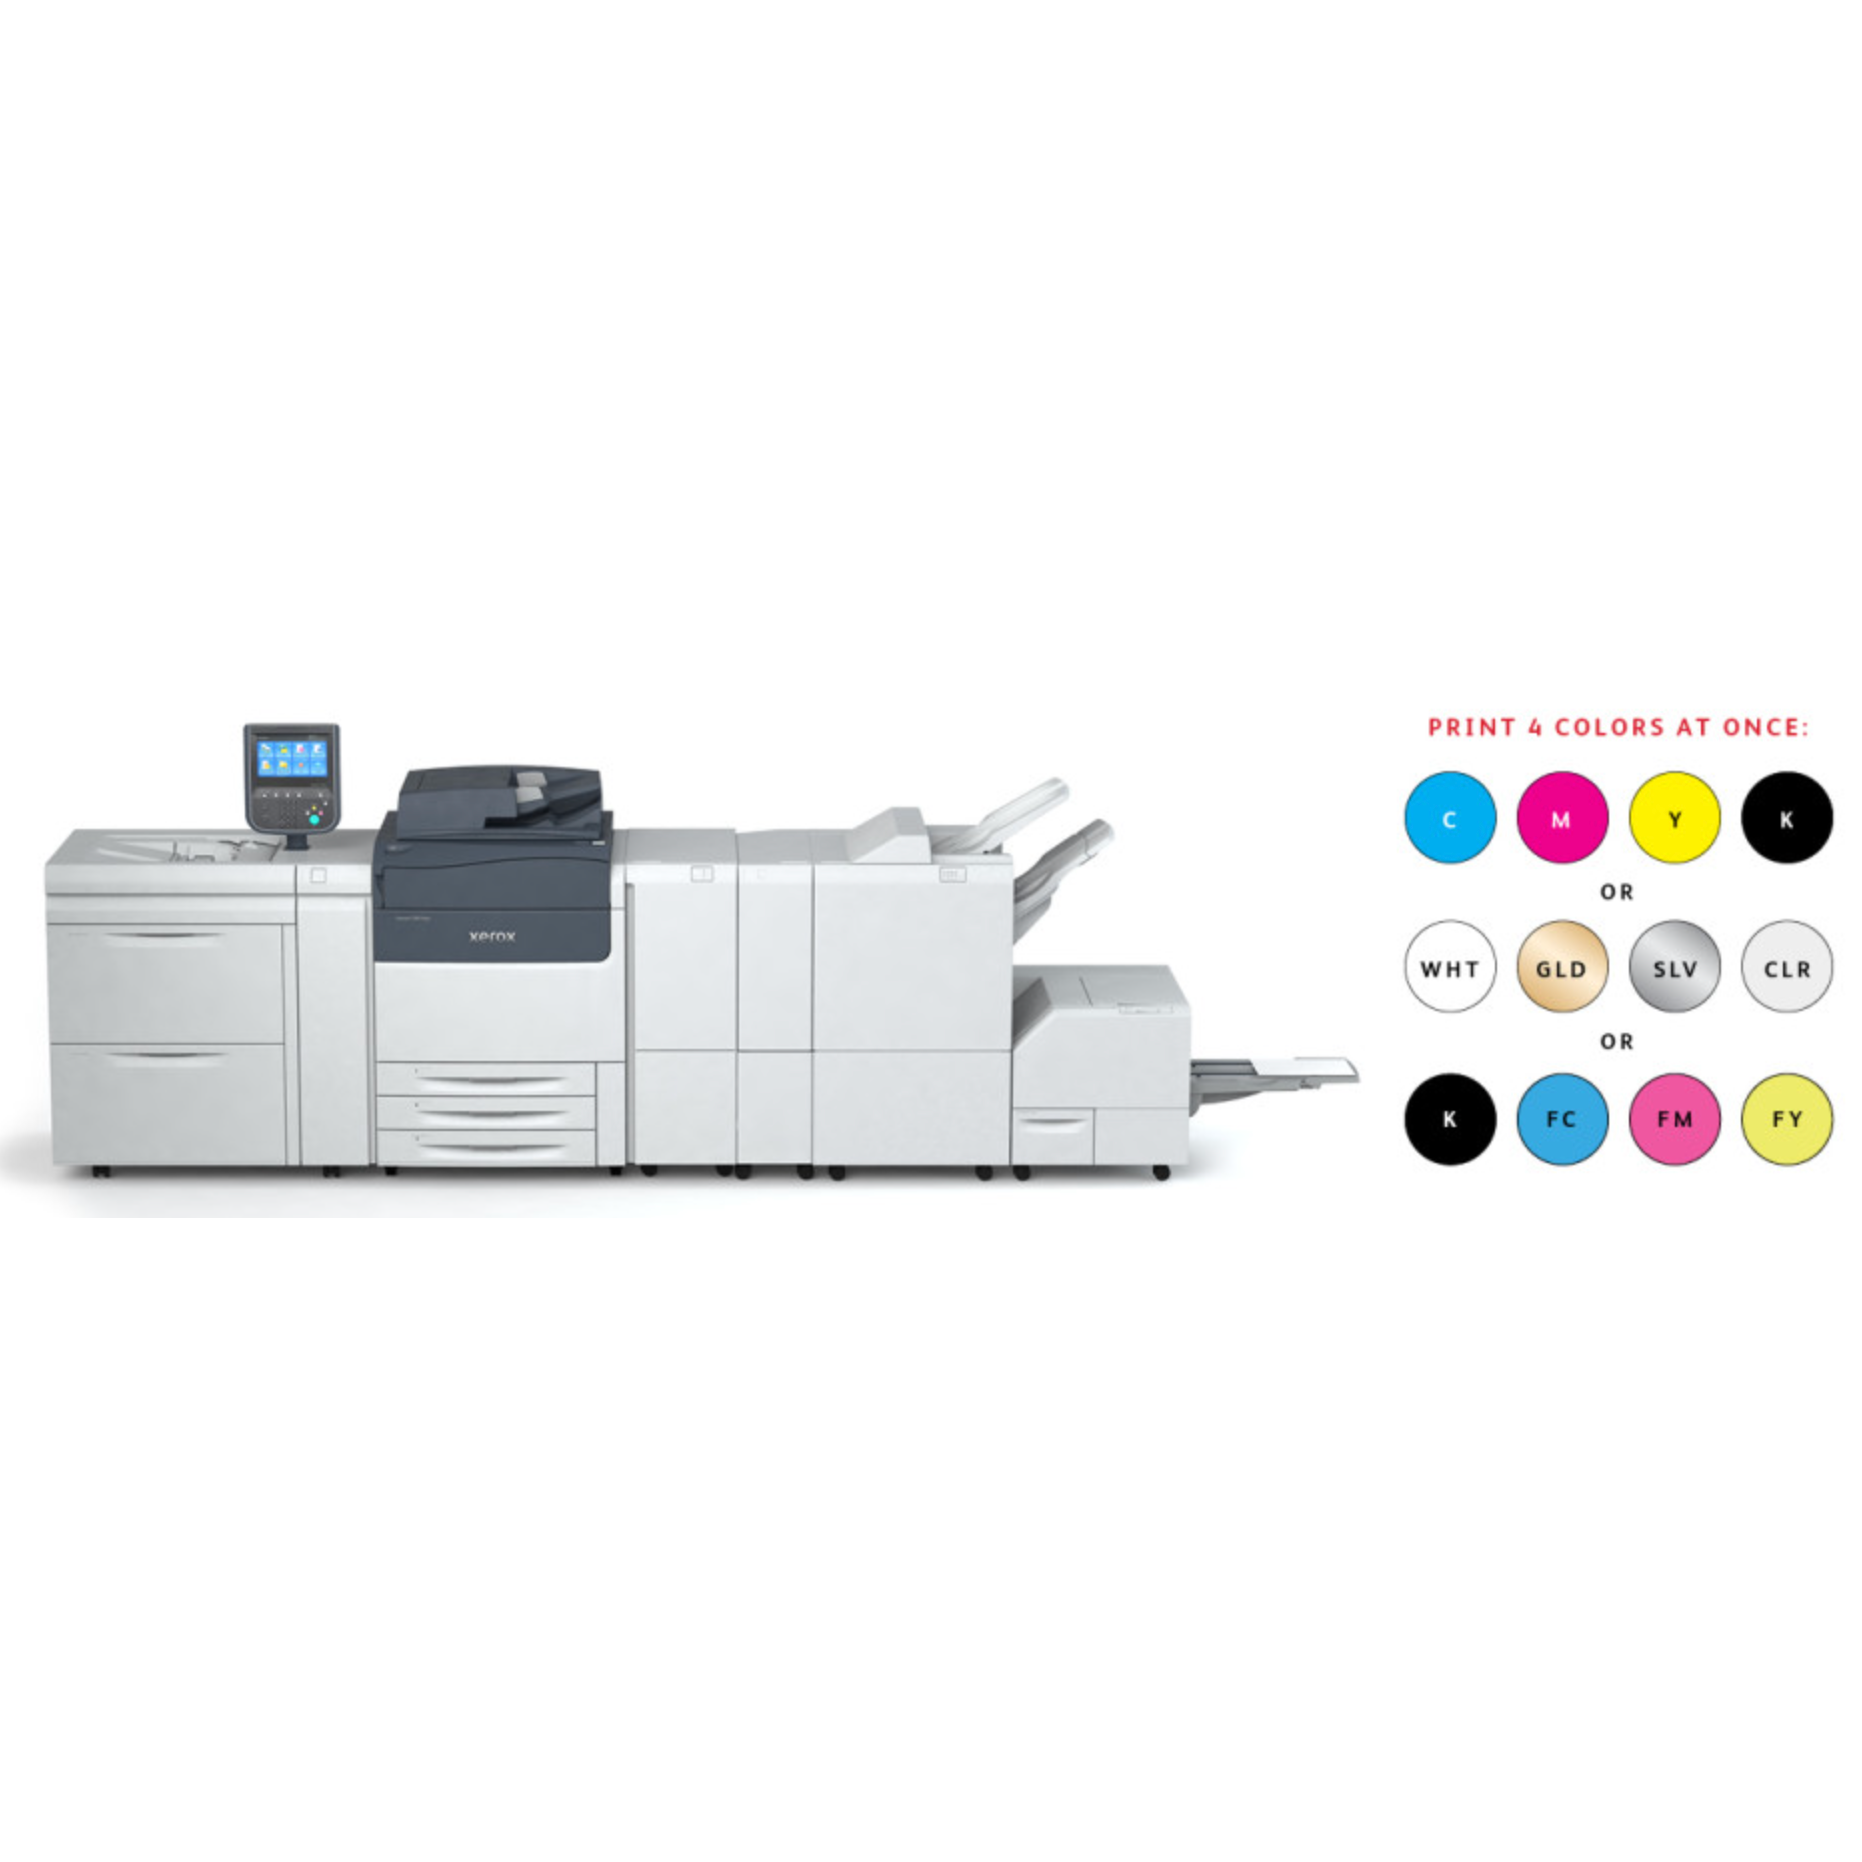 Digital Printing Solutions for Production Print - Xerox